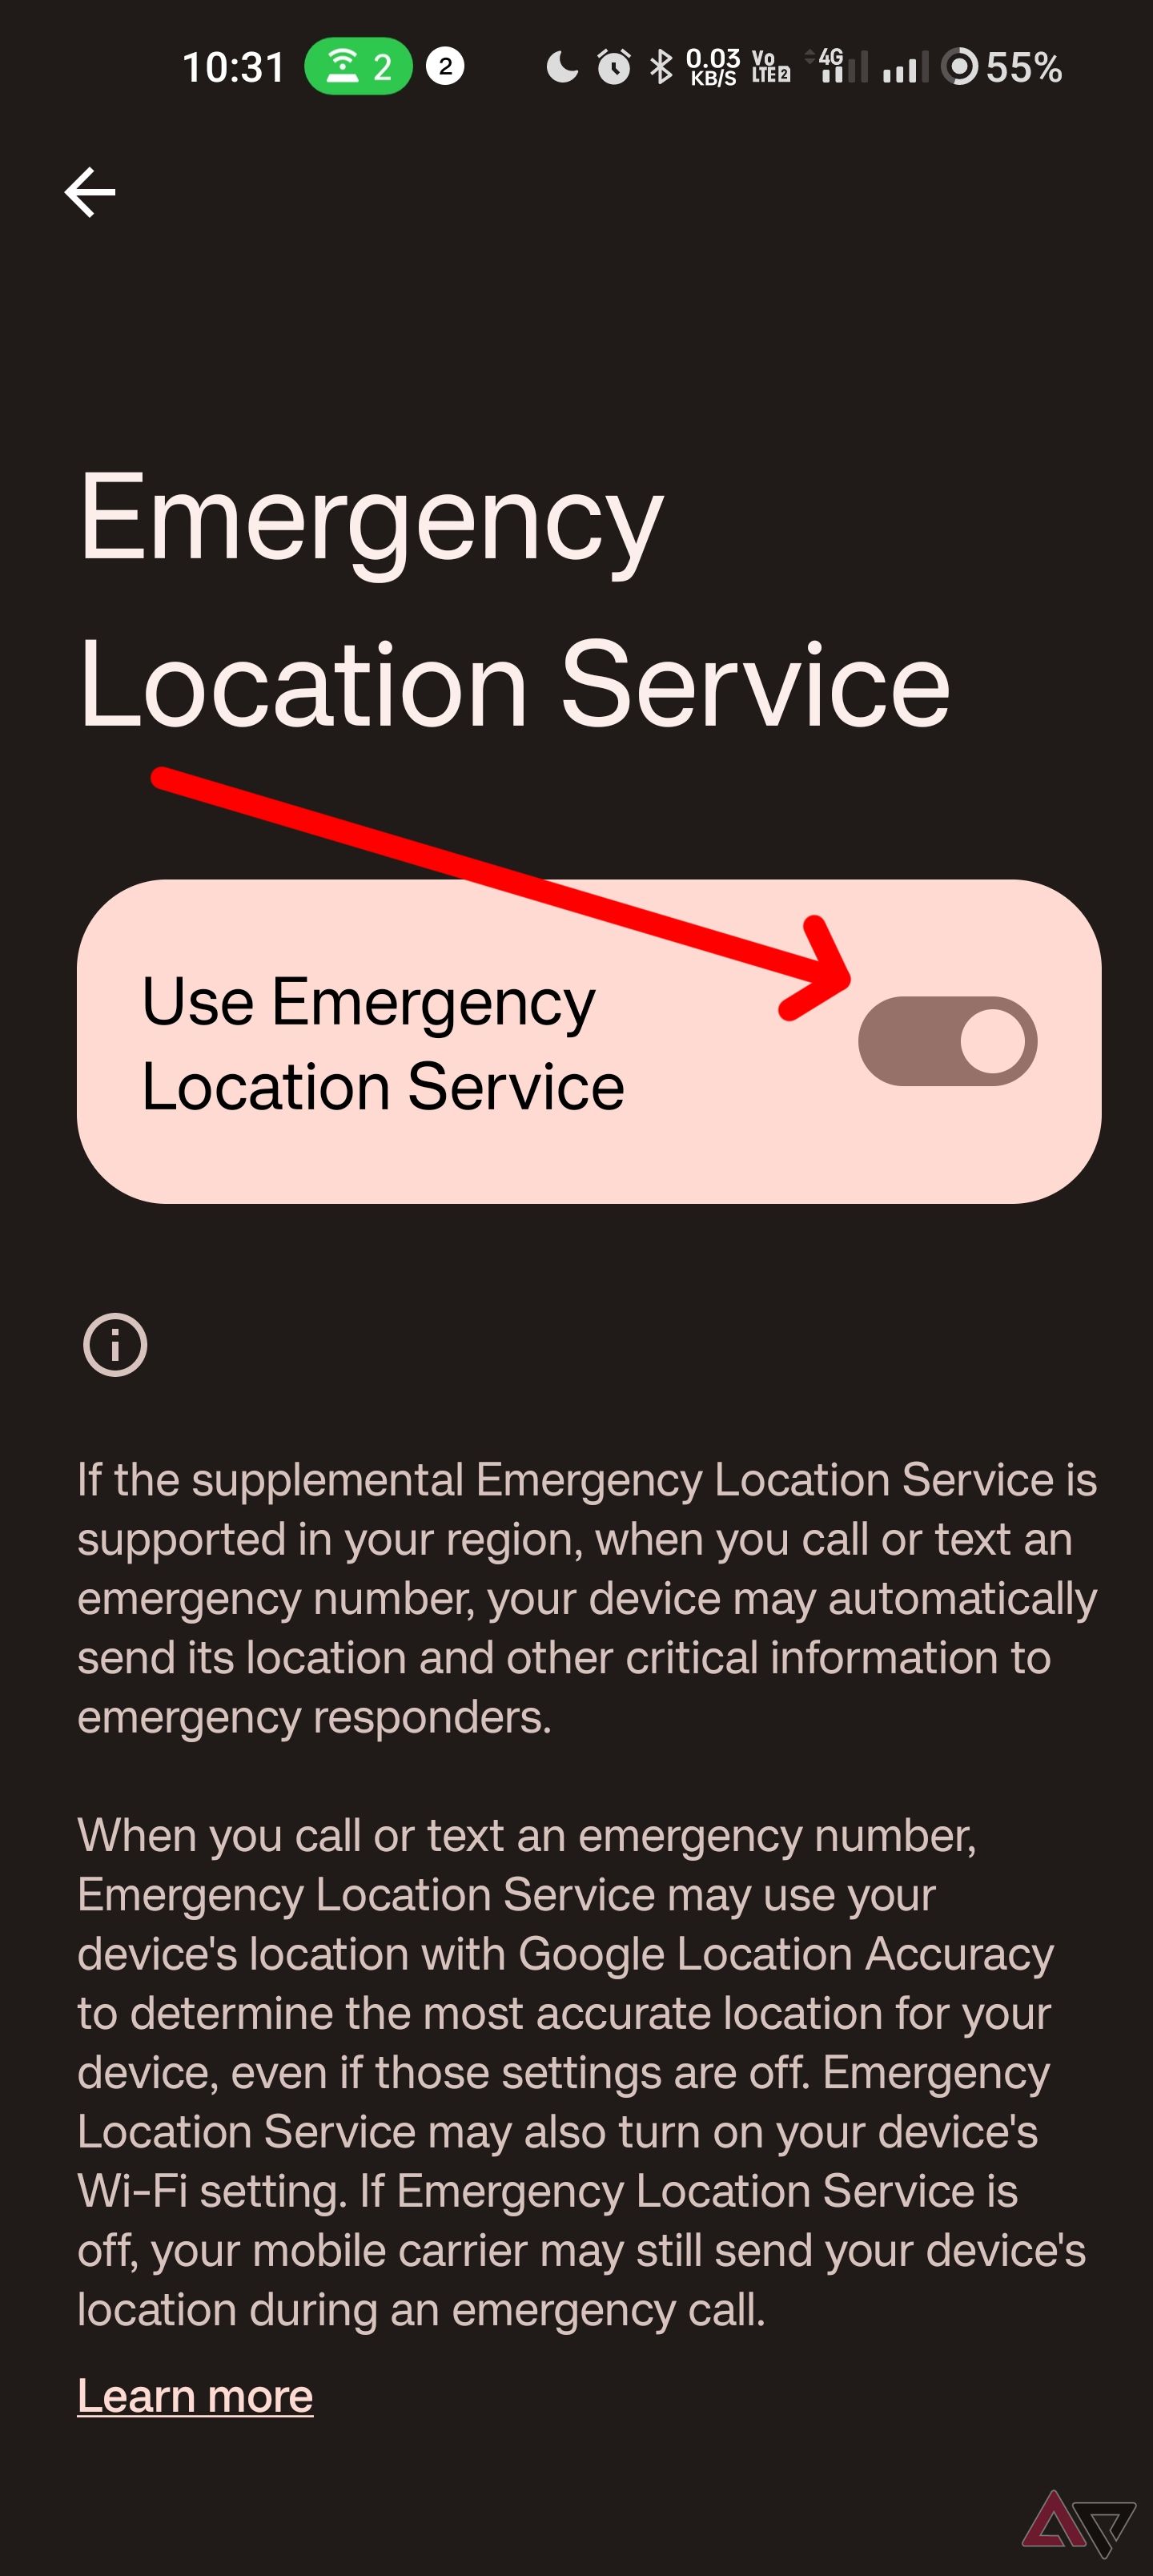 Toggle the switch on to allow emergency location services on your phone.